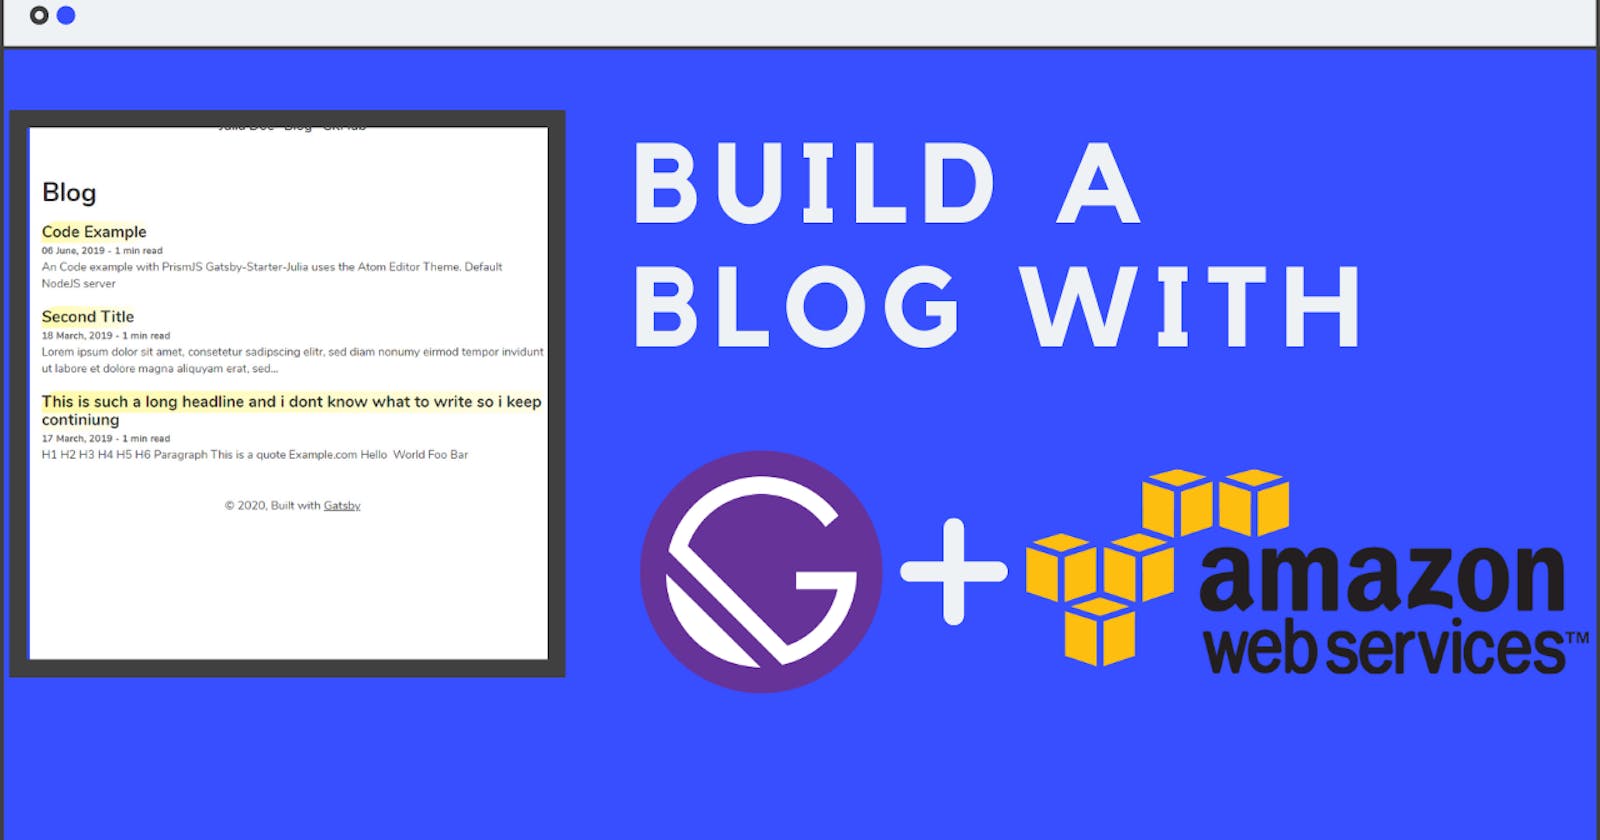 How to build a blog with Gatsby and AWS - Part 2